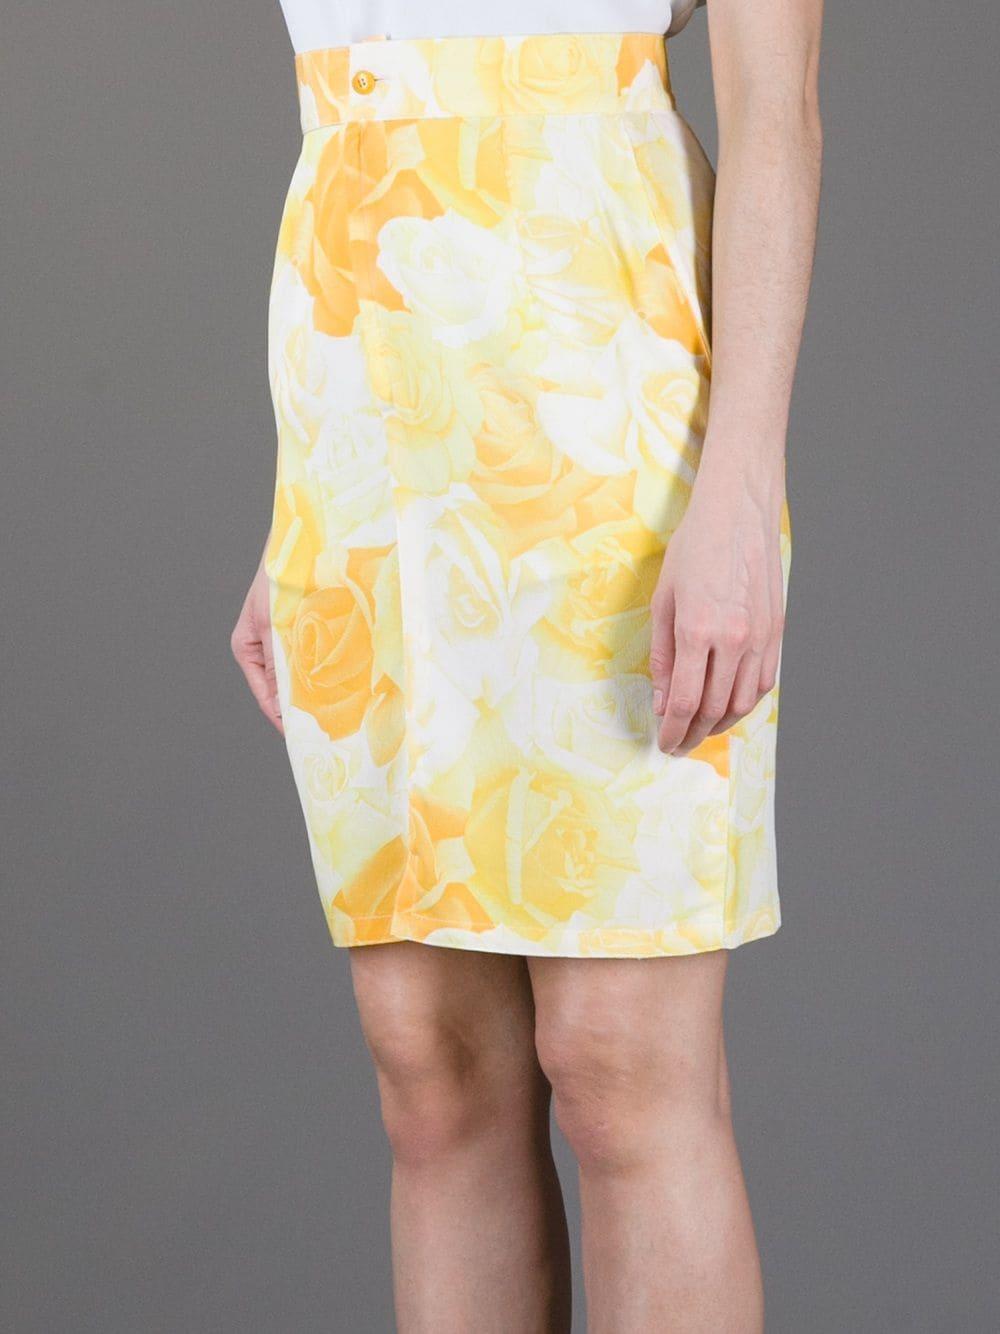 Gianni Versace white silk high waisted pencil skirt with yellow rose printed pattern, front zipped and buttoned fastening and short front slit. 
Years: 1990s

Made in Italy

Size: 42 IT

Linear measures

Height: 55 cm
Waist: 34 cm